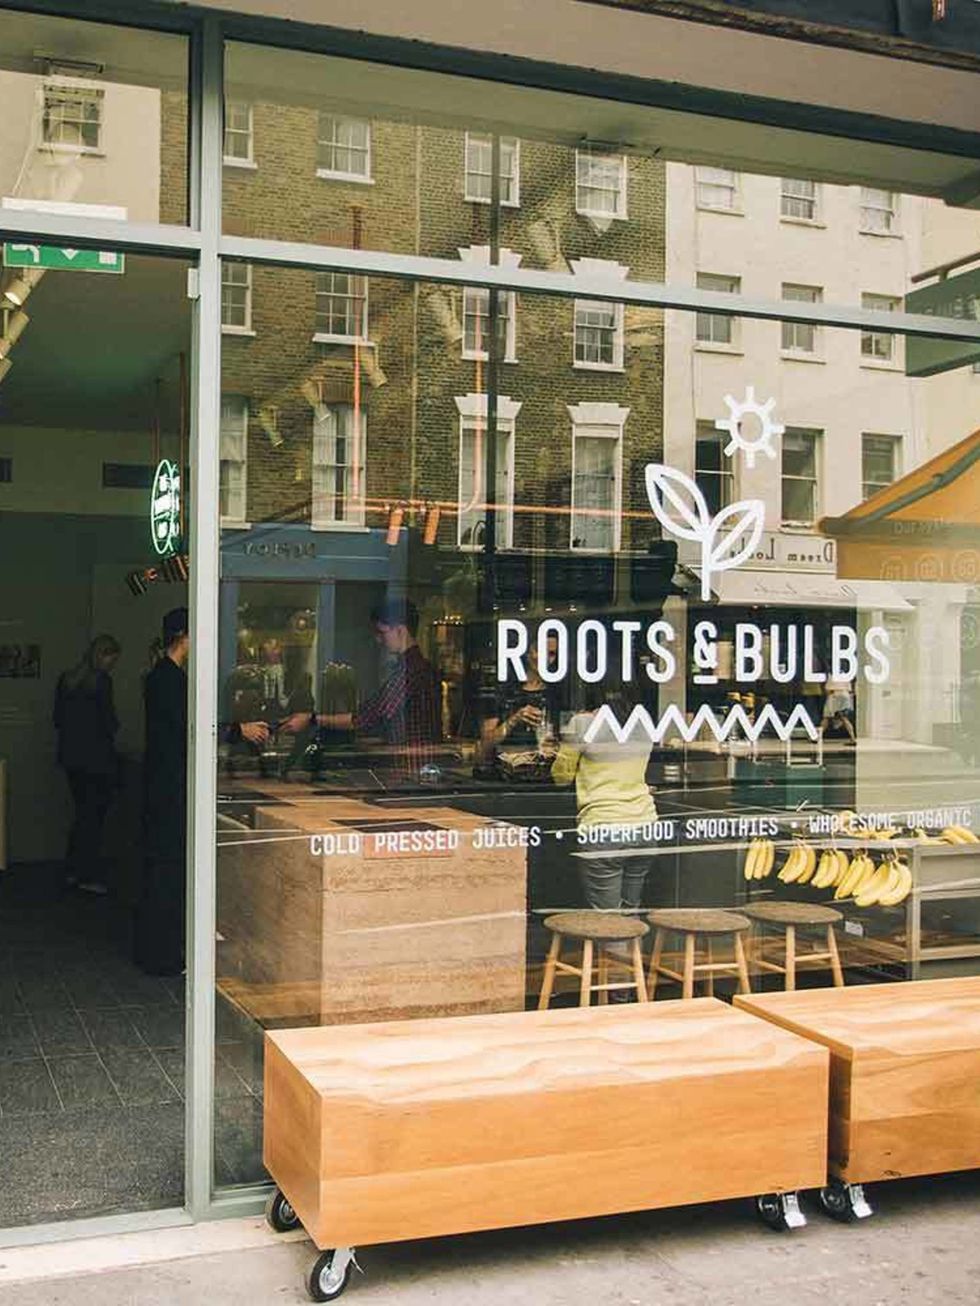 <p><a href="http://www.rootsandbulbs.com/" target="_blank">Roots & Bulbs</a></p>

<p>What? One of the UKs first cold-pressed juice bars.</p>

<p>Why visit? There is a simple menu of three carrot-based and three greens-based juices. The smoothies are enti